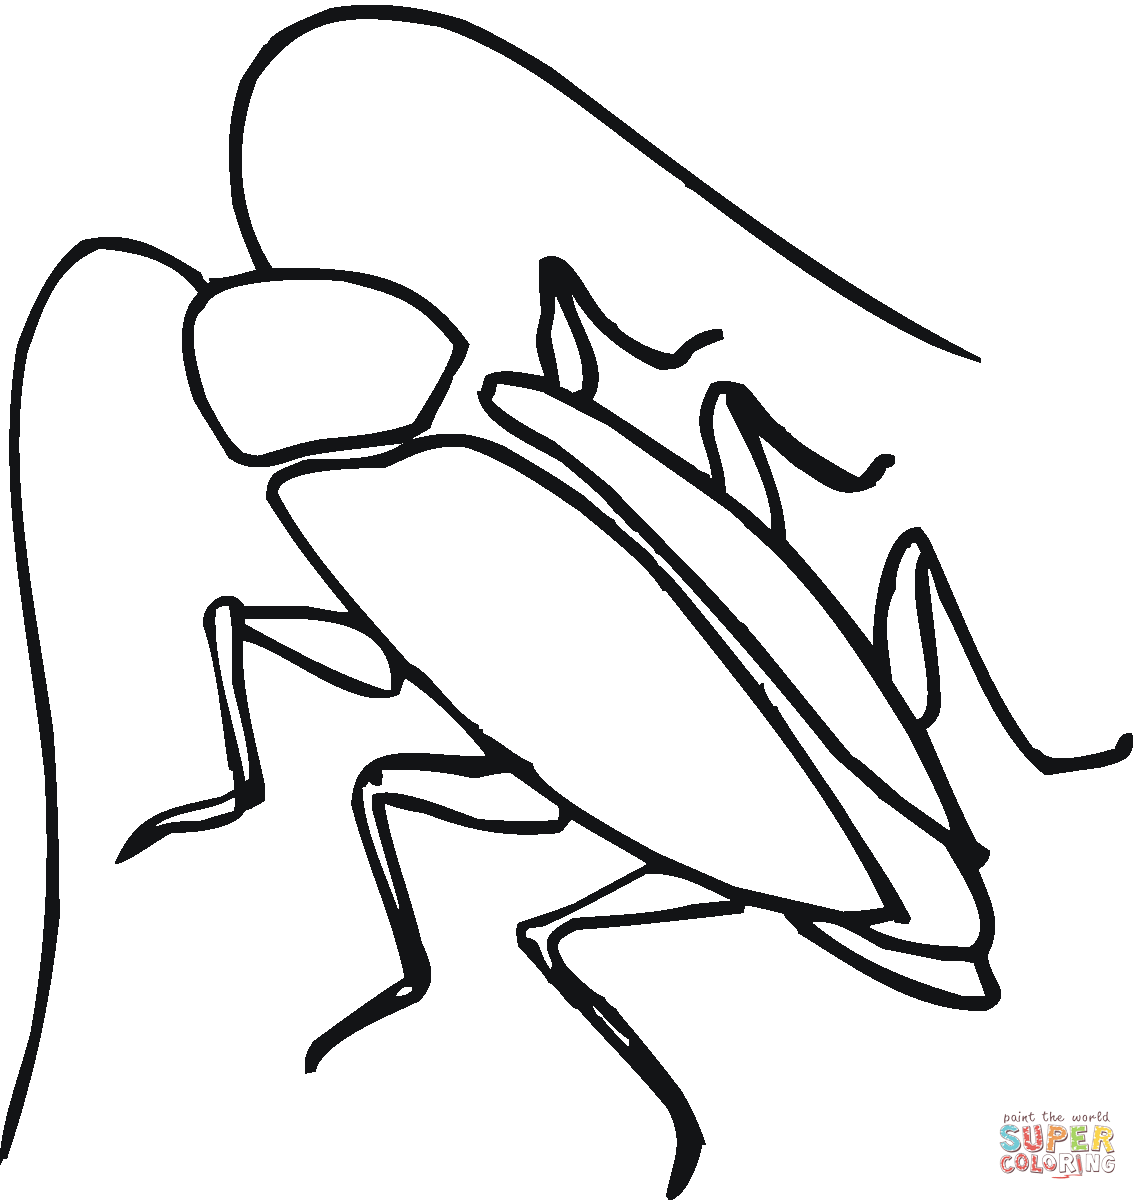 Cockroach coloring pages free coloring pages clip art